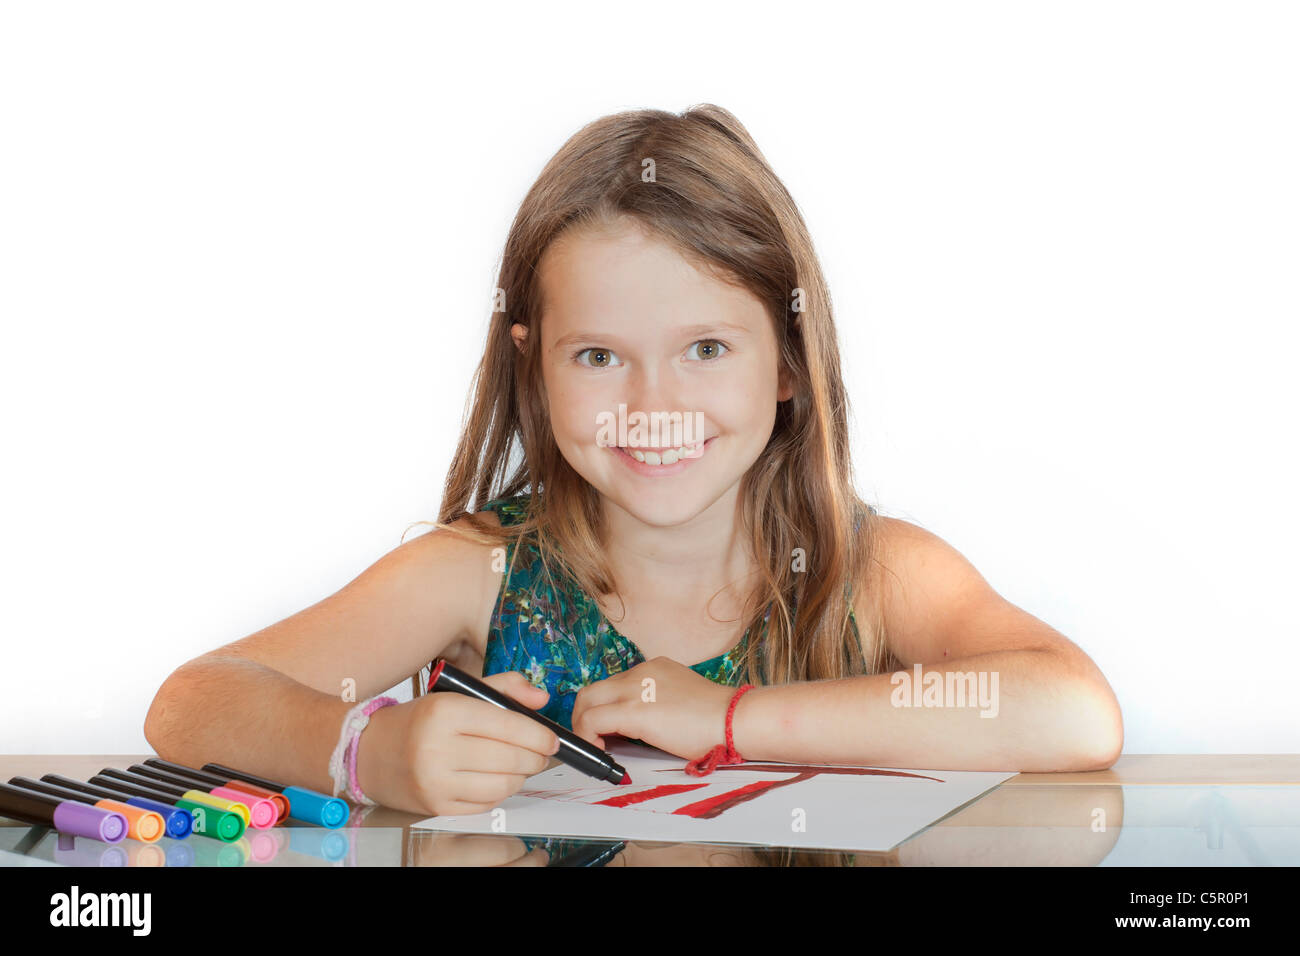 https://c8.alamy.com/comp/C5R0P1/eight-year-old-girl-draws-a-picture-with-markers-C5R0P1.jpg